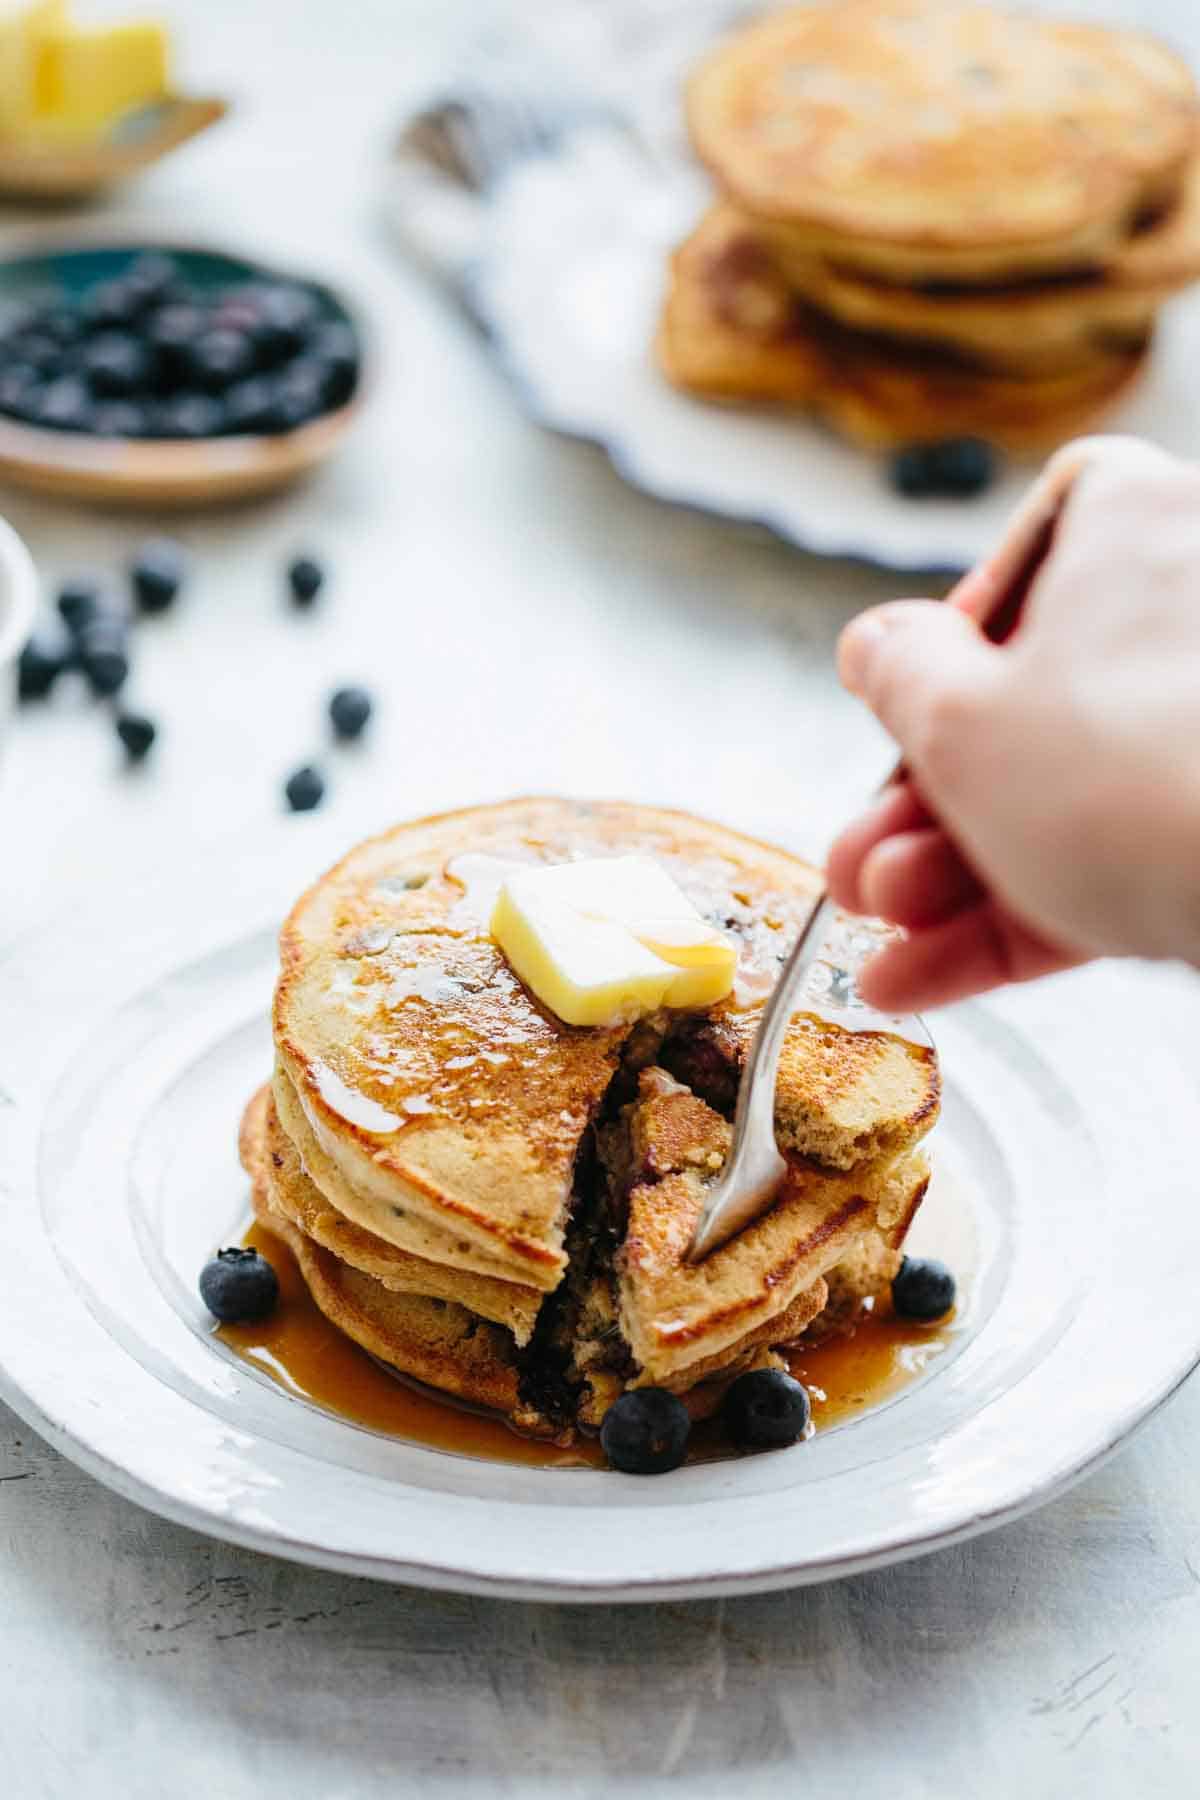 A fork digging into a piece cut out from a stack of pancakes.